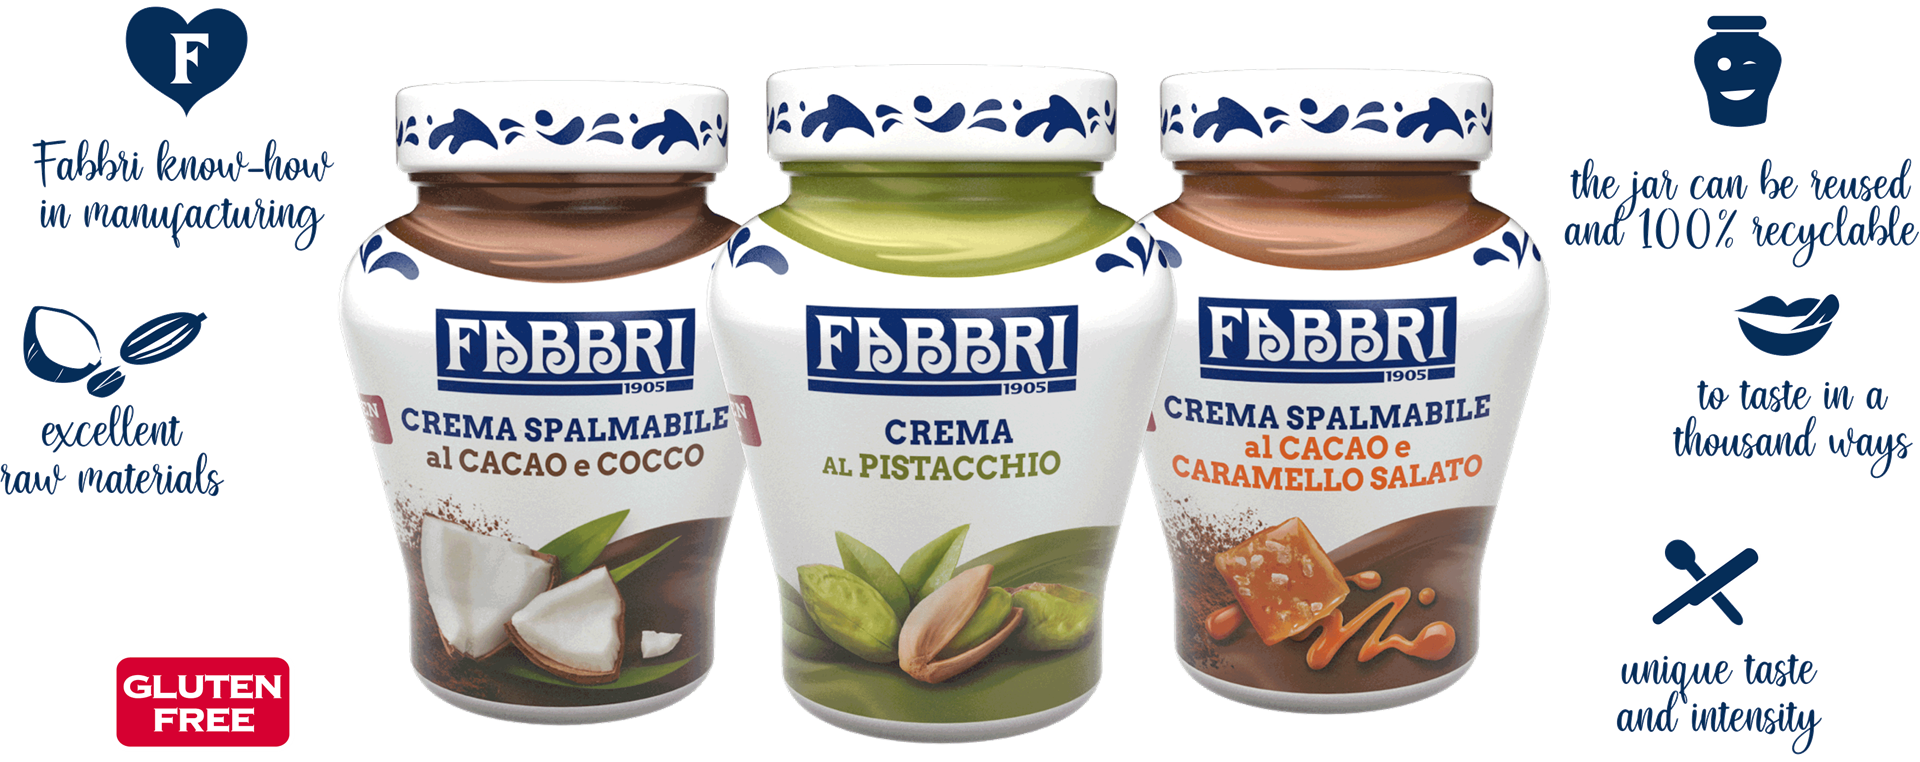 Fabbri Spreads products